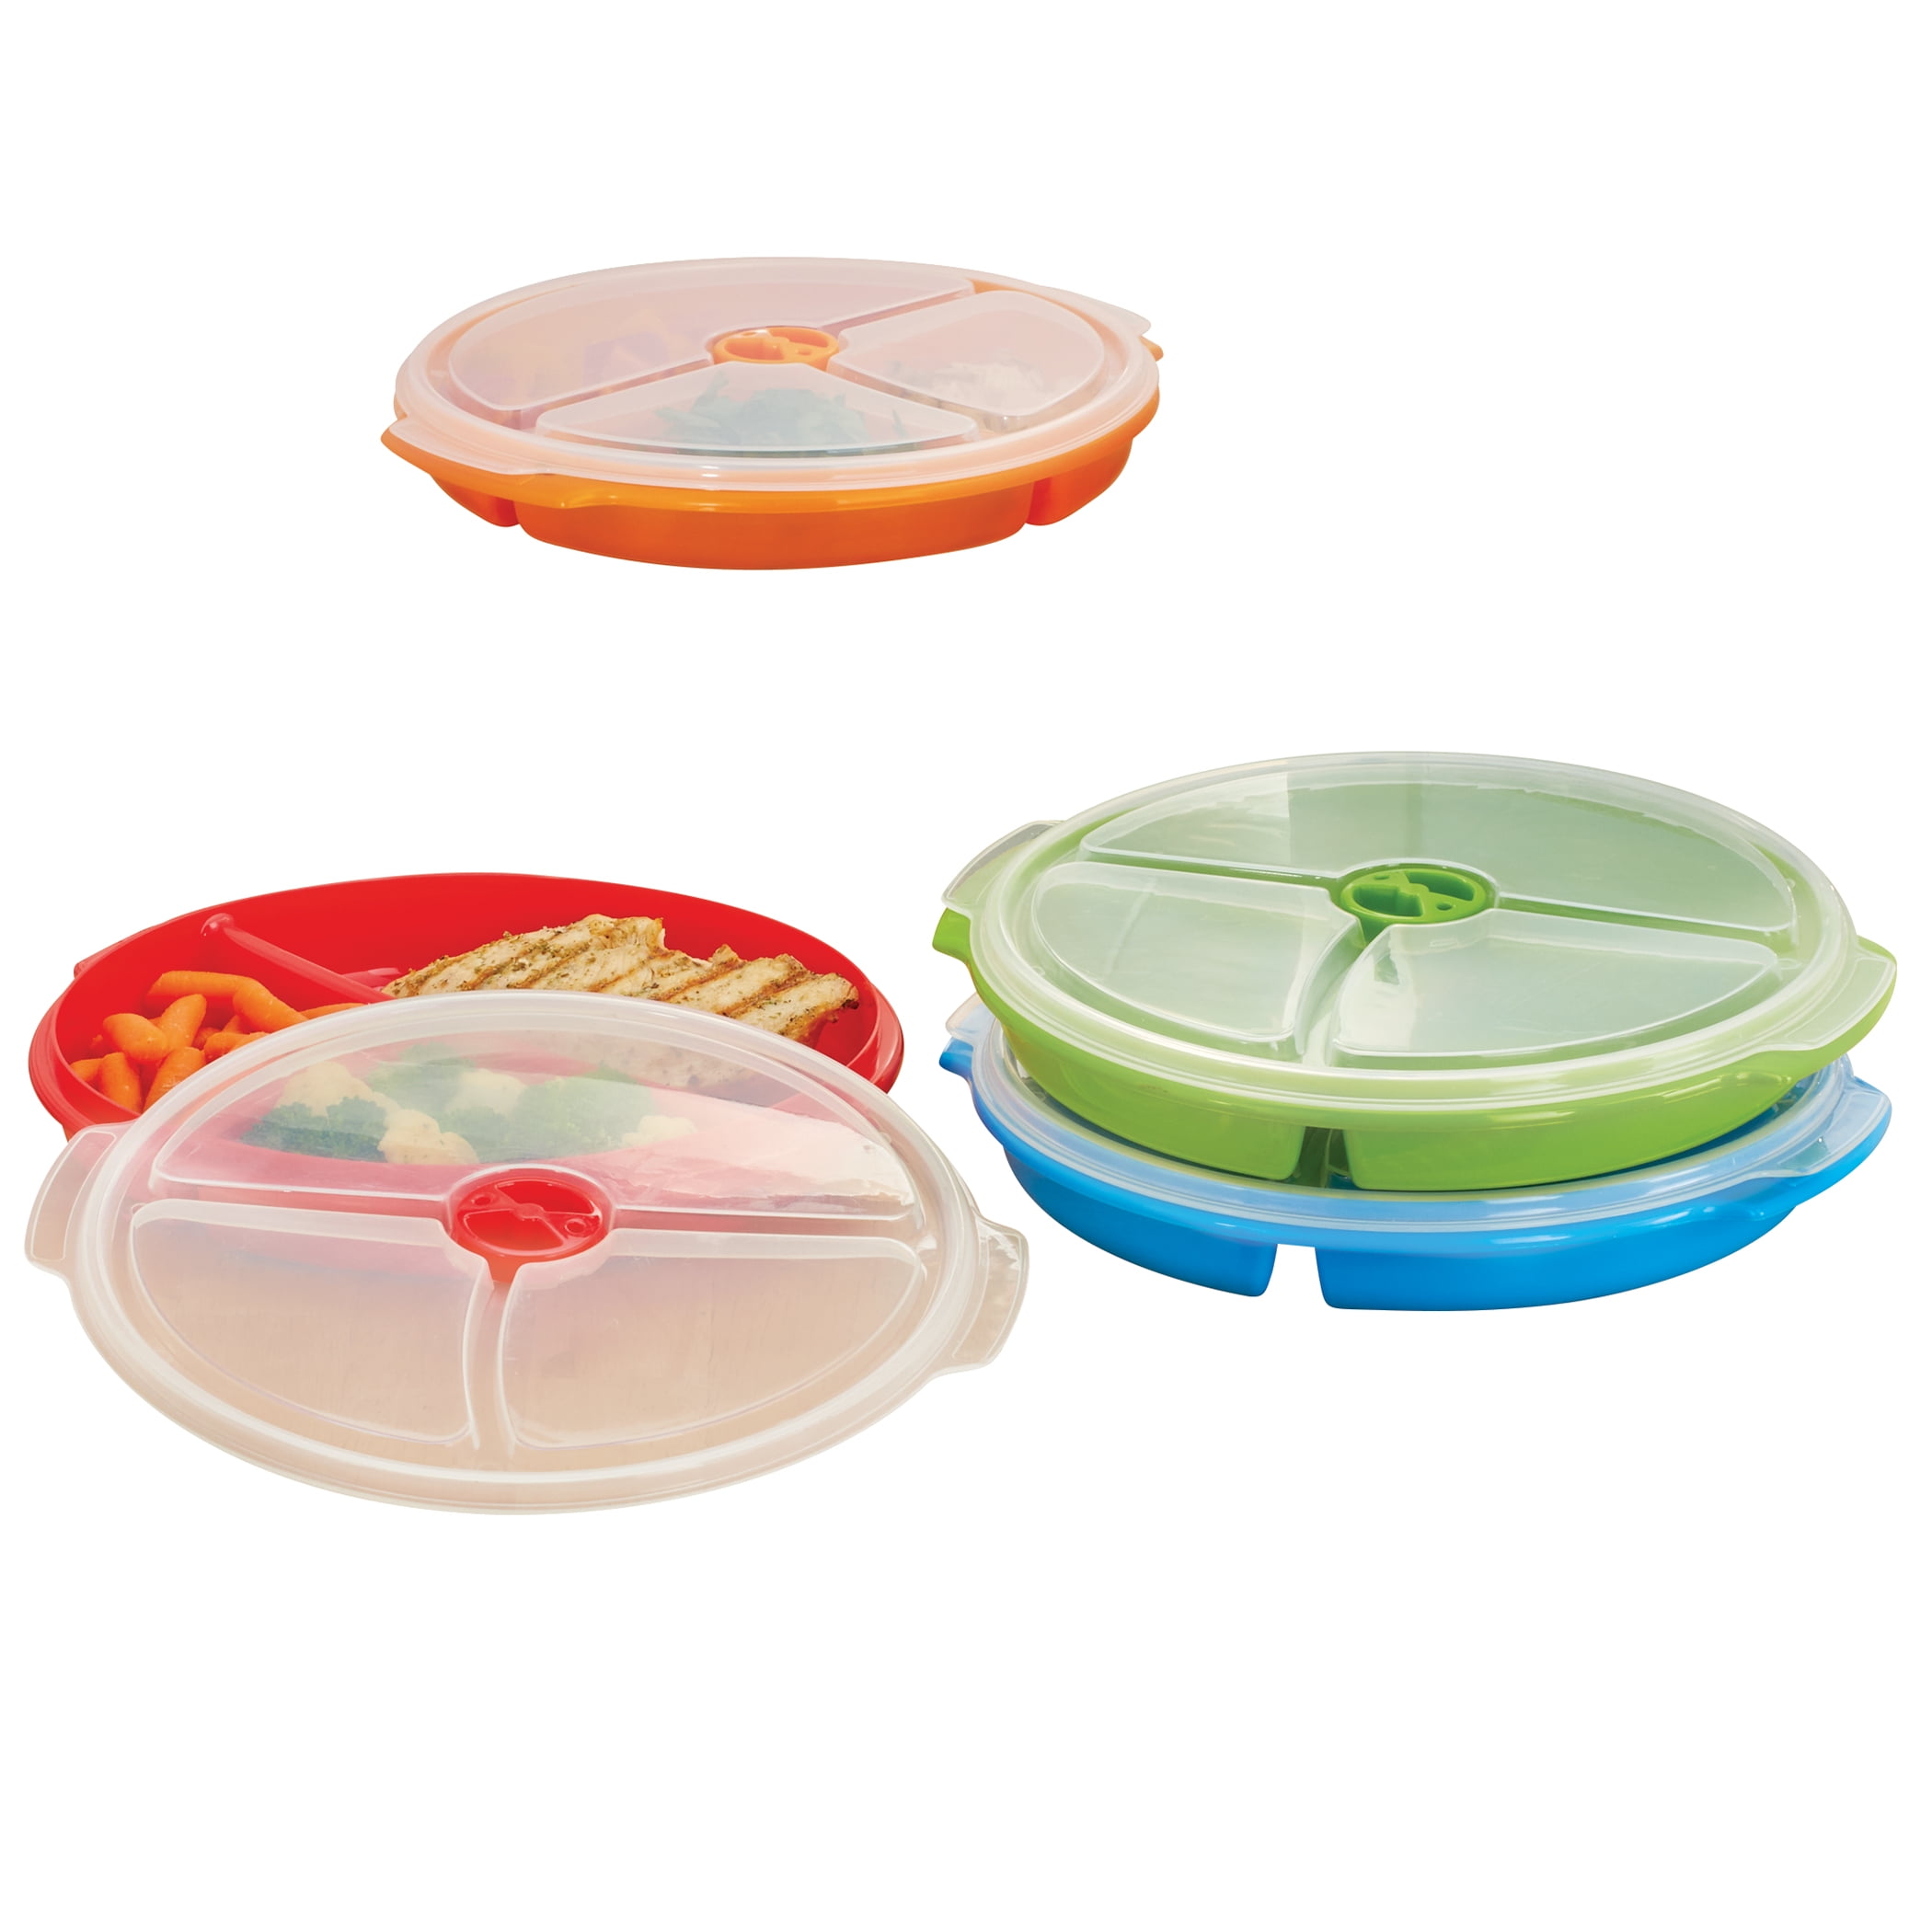 Decor (Set Of 5) Microsafe Segmented Plastic Plates w/ Clear Vented Lid